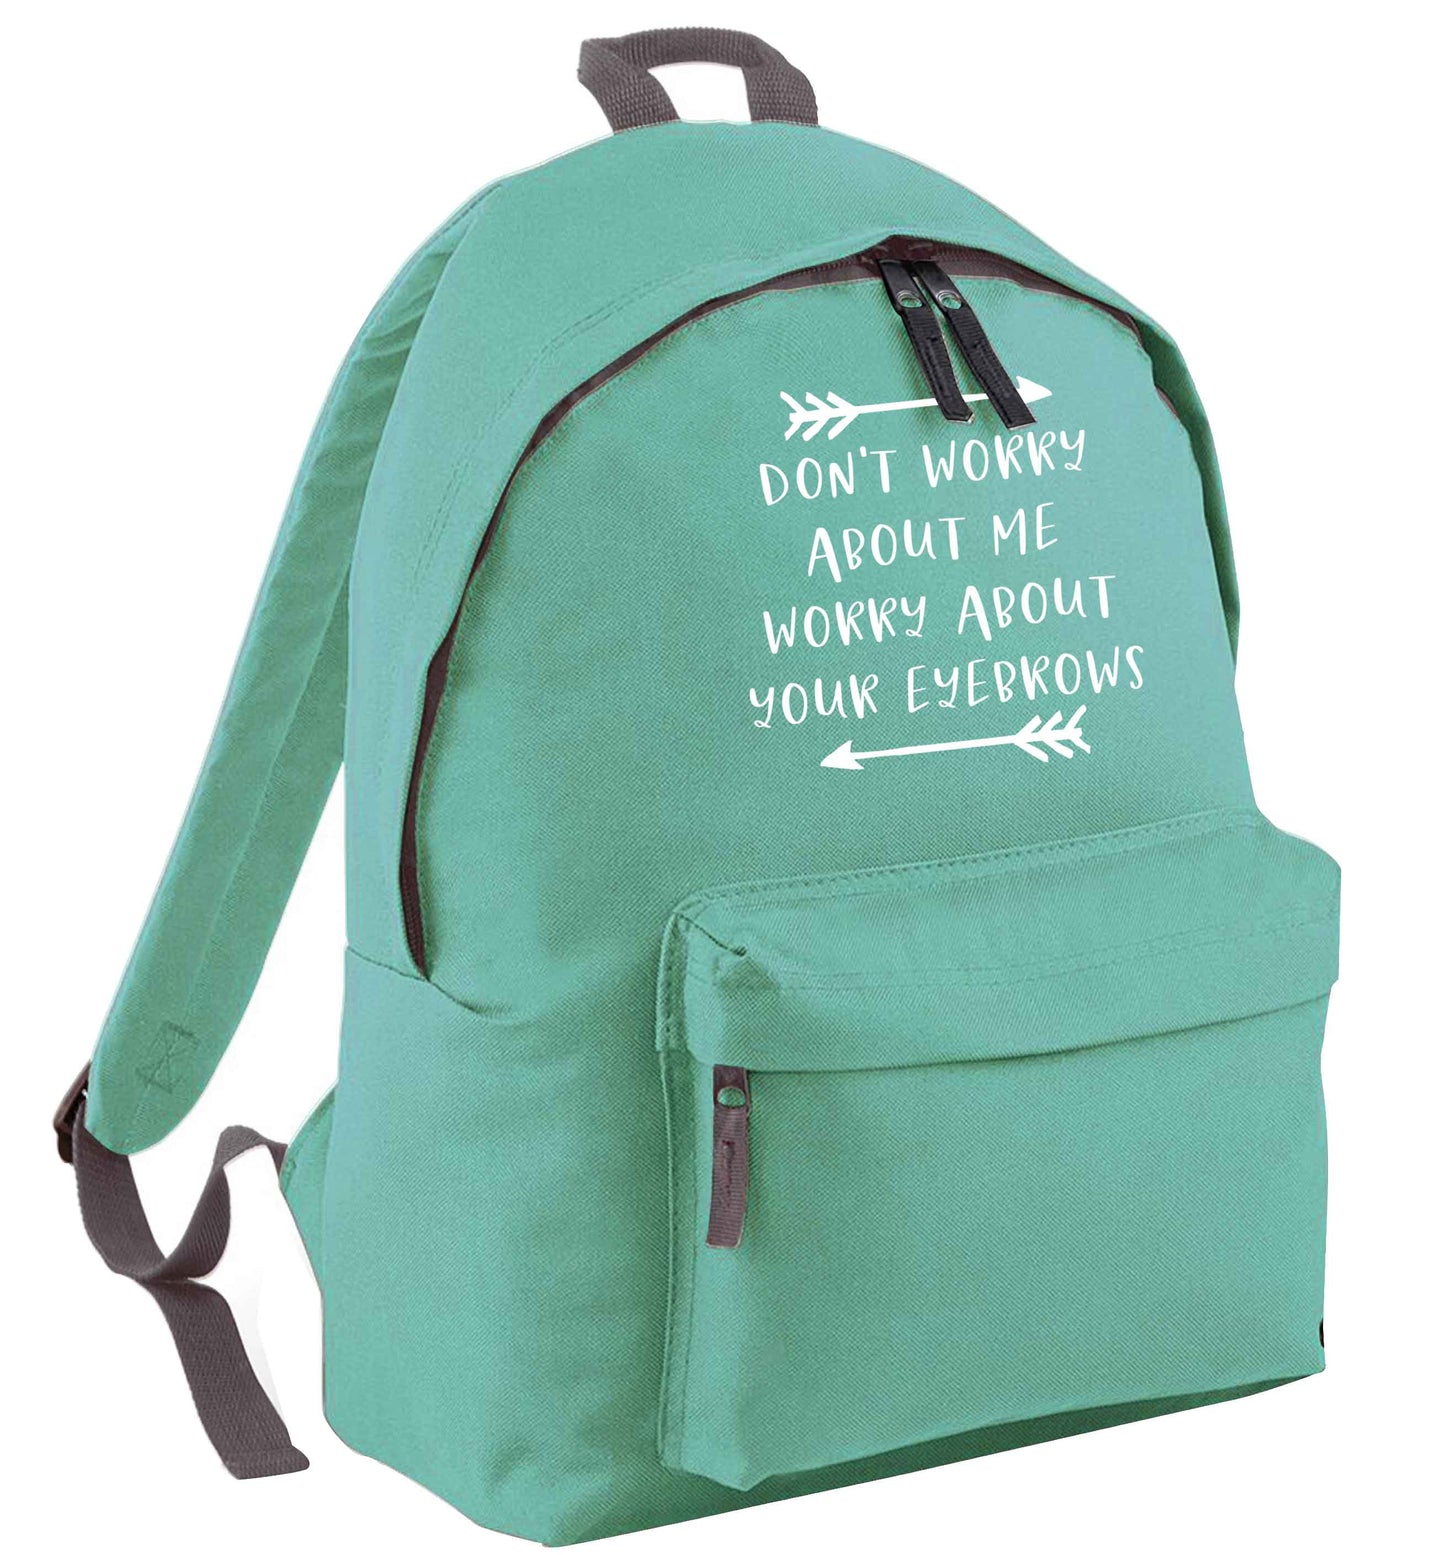 Don't worry about me worry about your eyebrows mint adults backpack